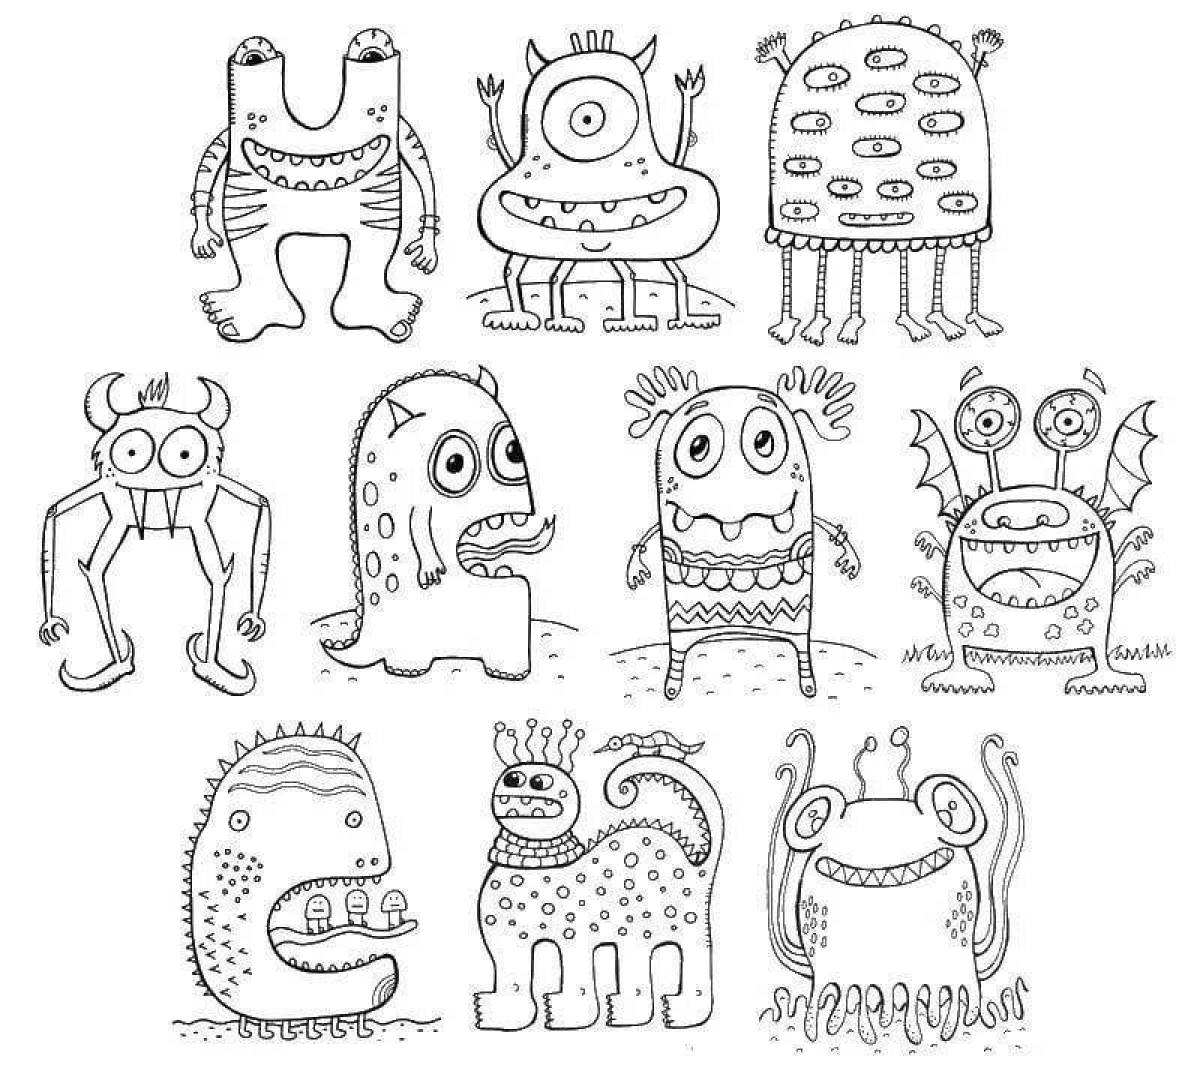 Adorable rainbow monster coloring page